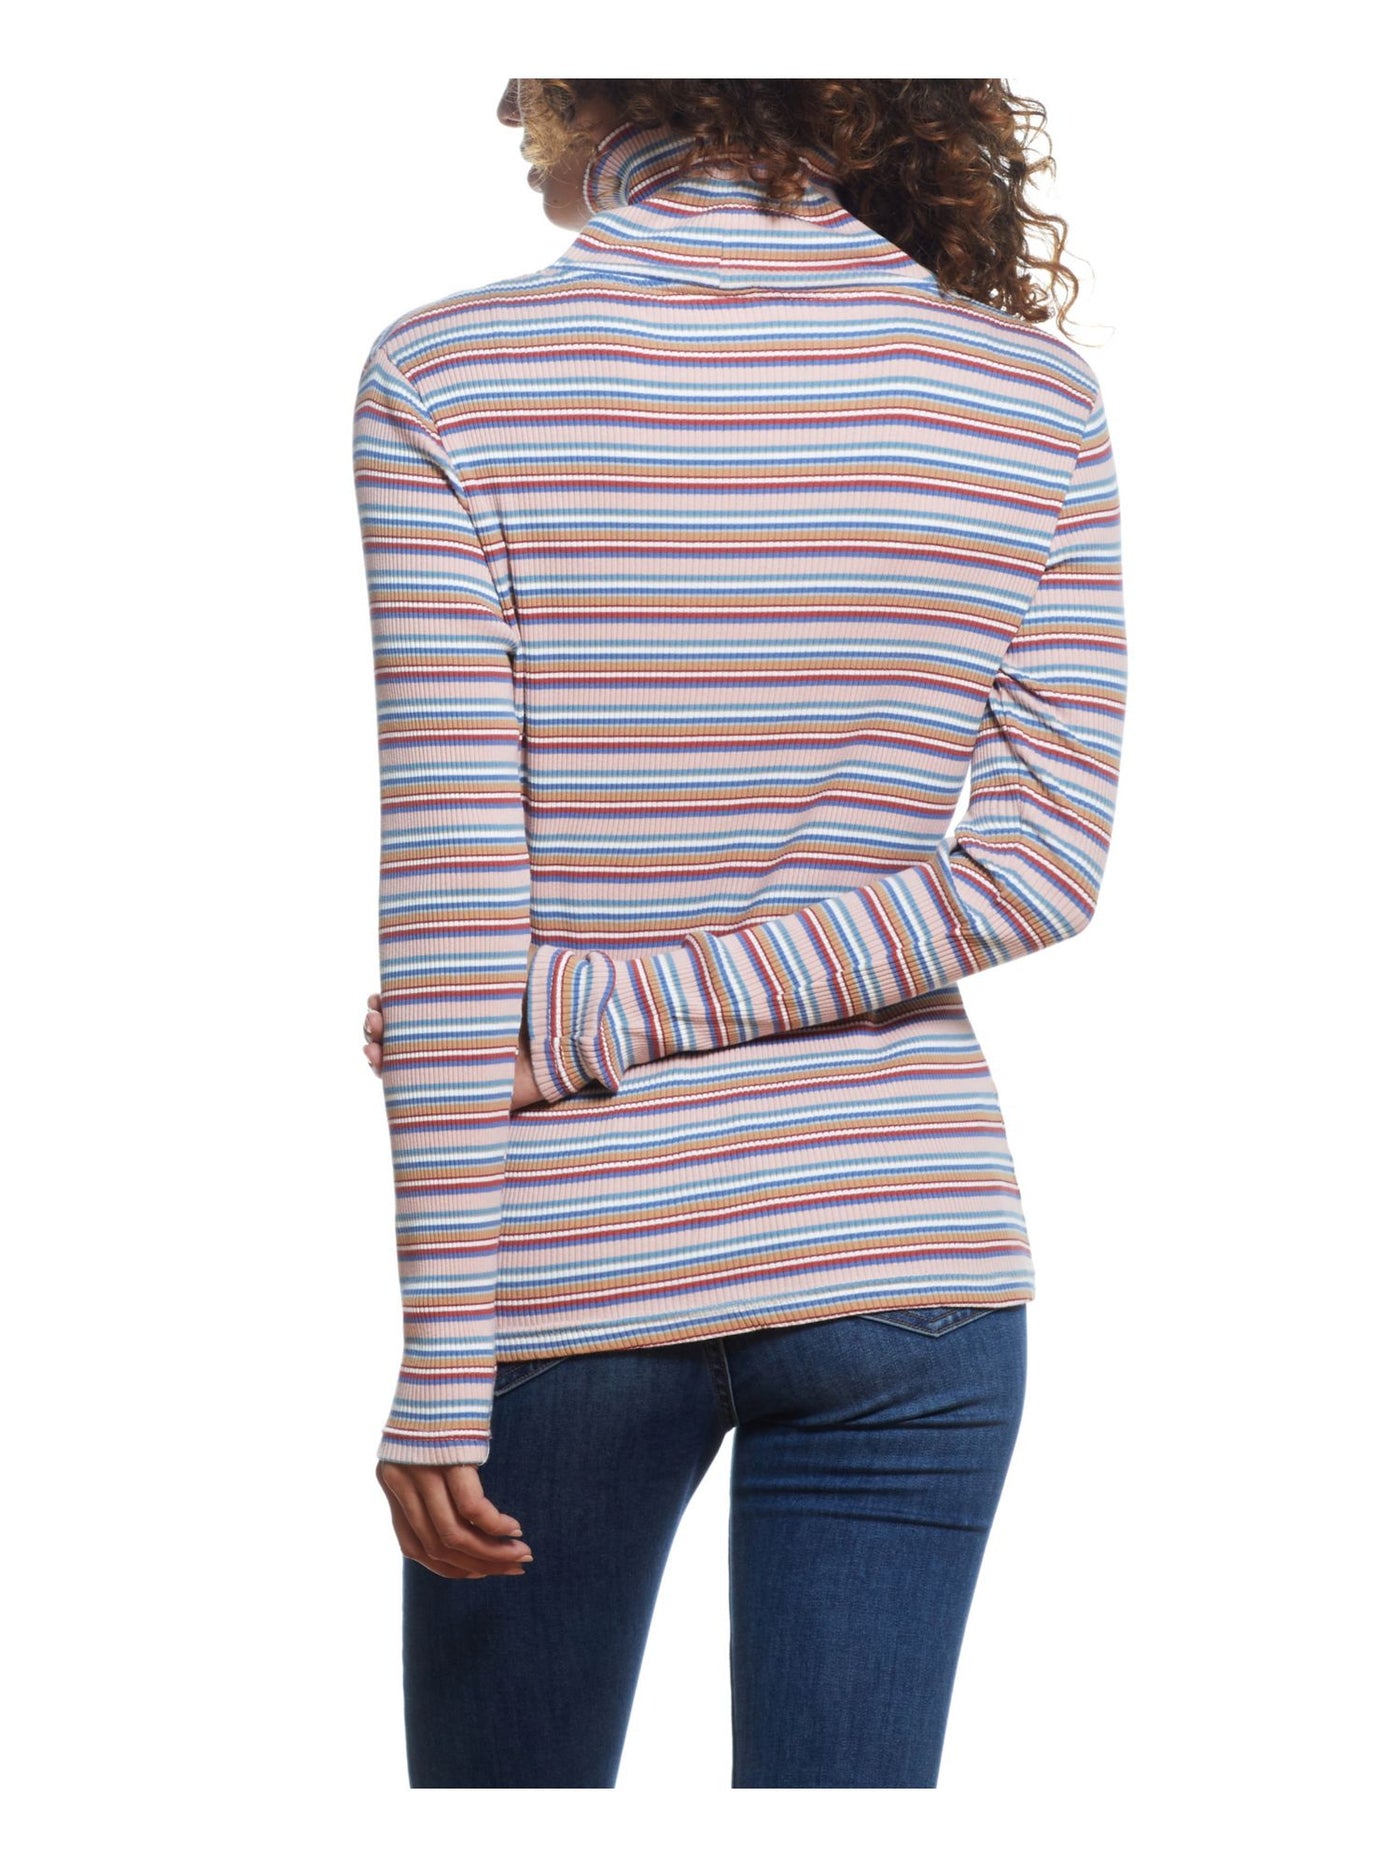 WEATHERPROOF VINTAGE Womens Pink Fitted Striped Long Sleeve Turtle Neck Top L